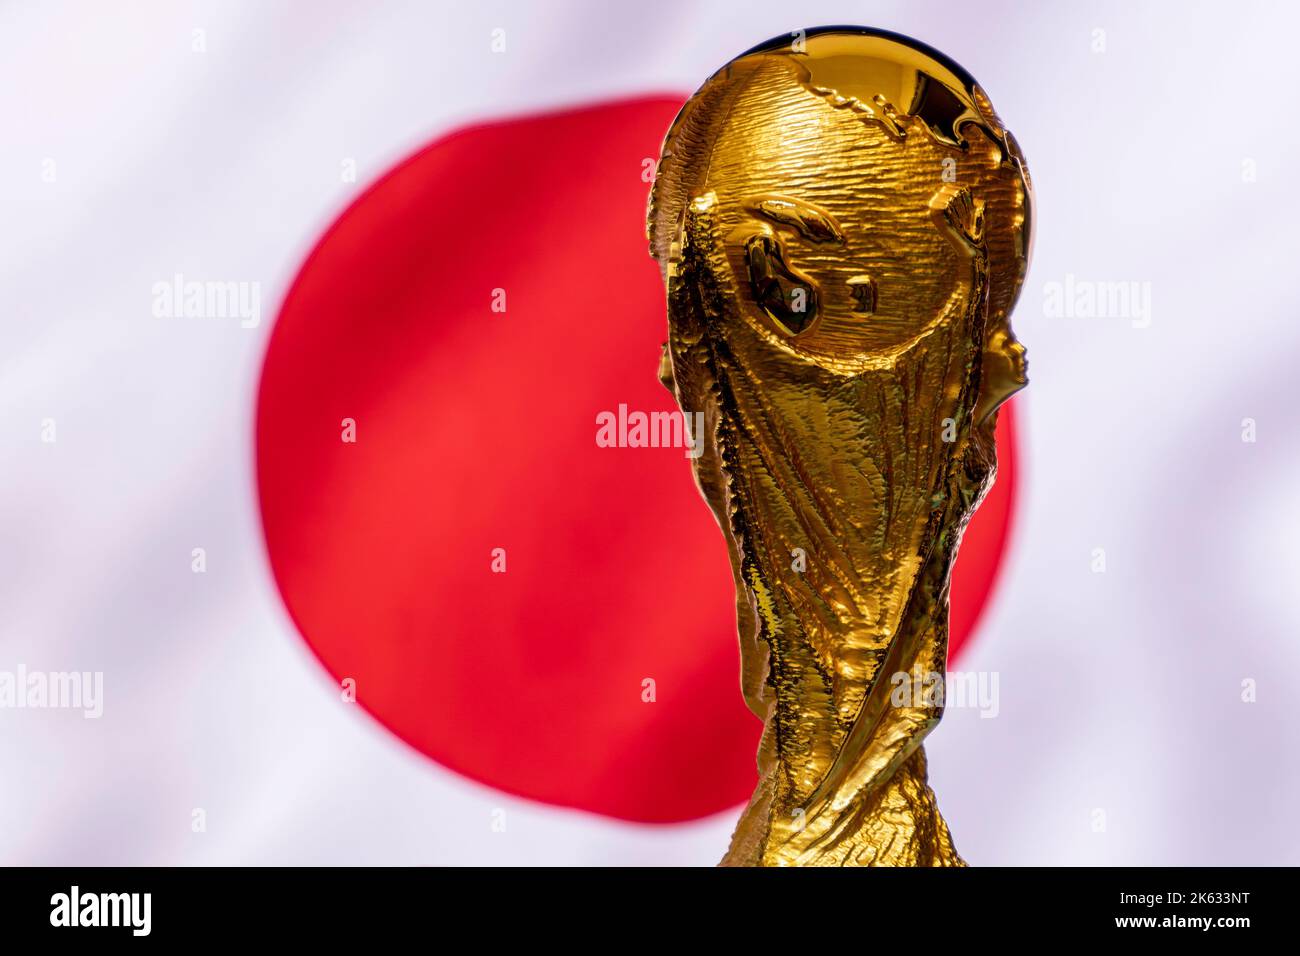 FIFA World Cup trophy against the background of Japan flag. Stock Photo